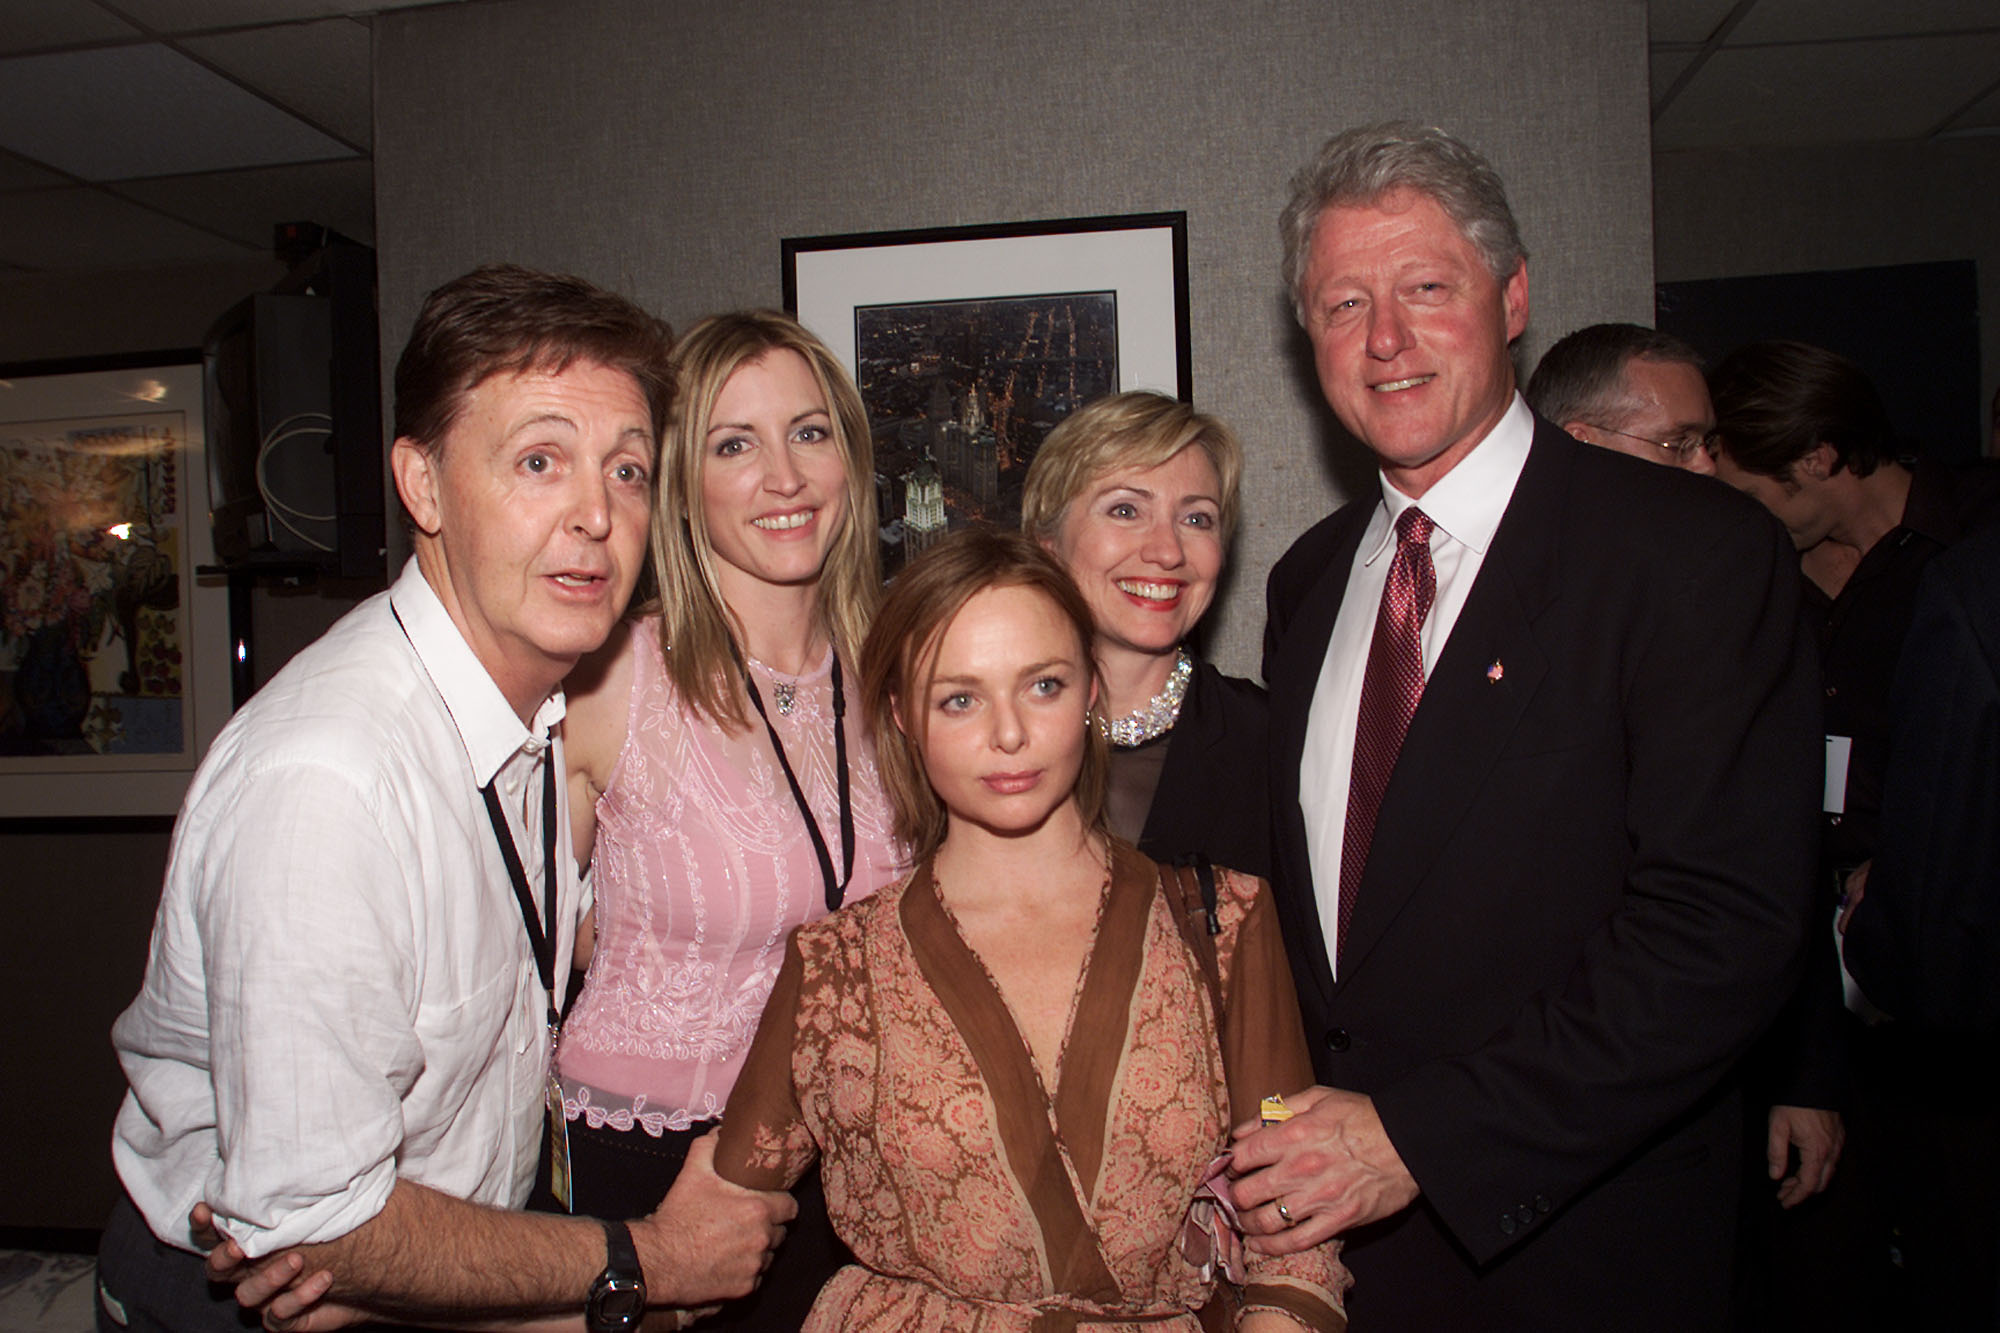 Paul McCartney, Heather Mills, Stella McCartney and Hillary and Bill Clinton at The Concert for New York City in New York City on October 20, 2001 | Source: Getty Images